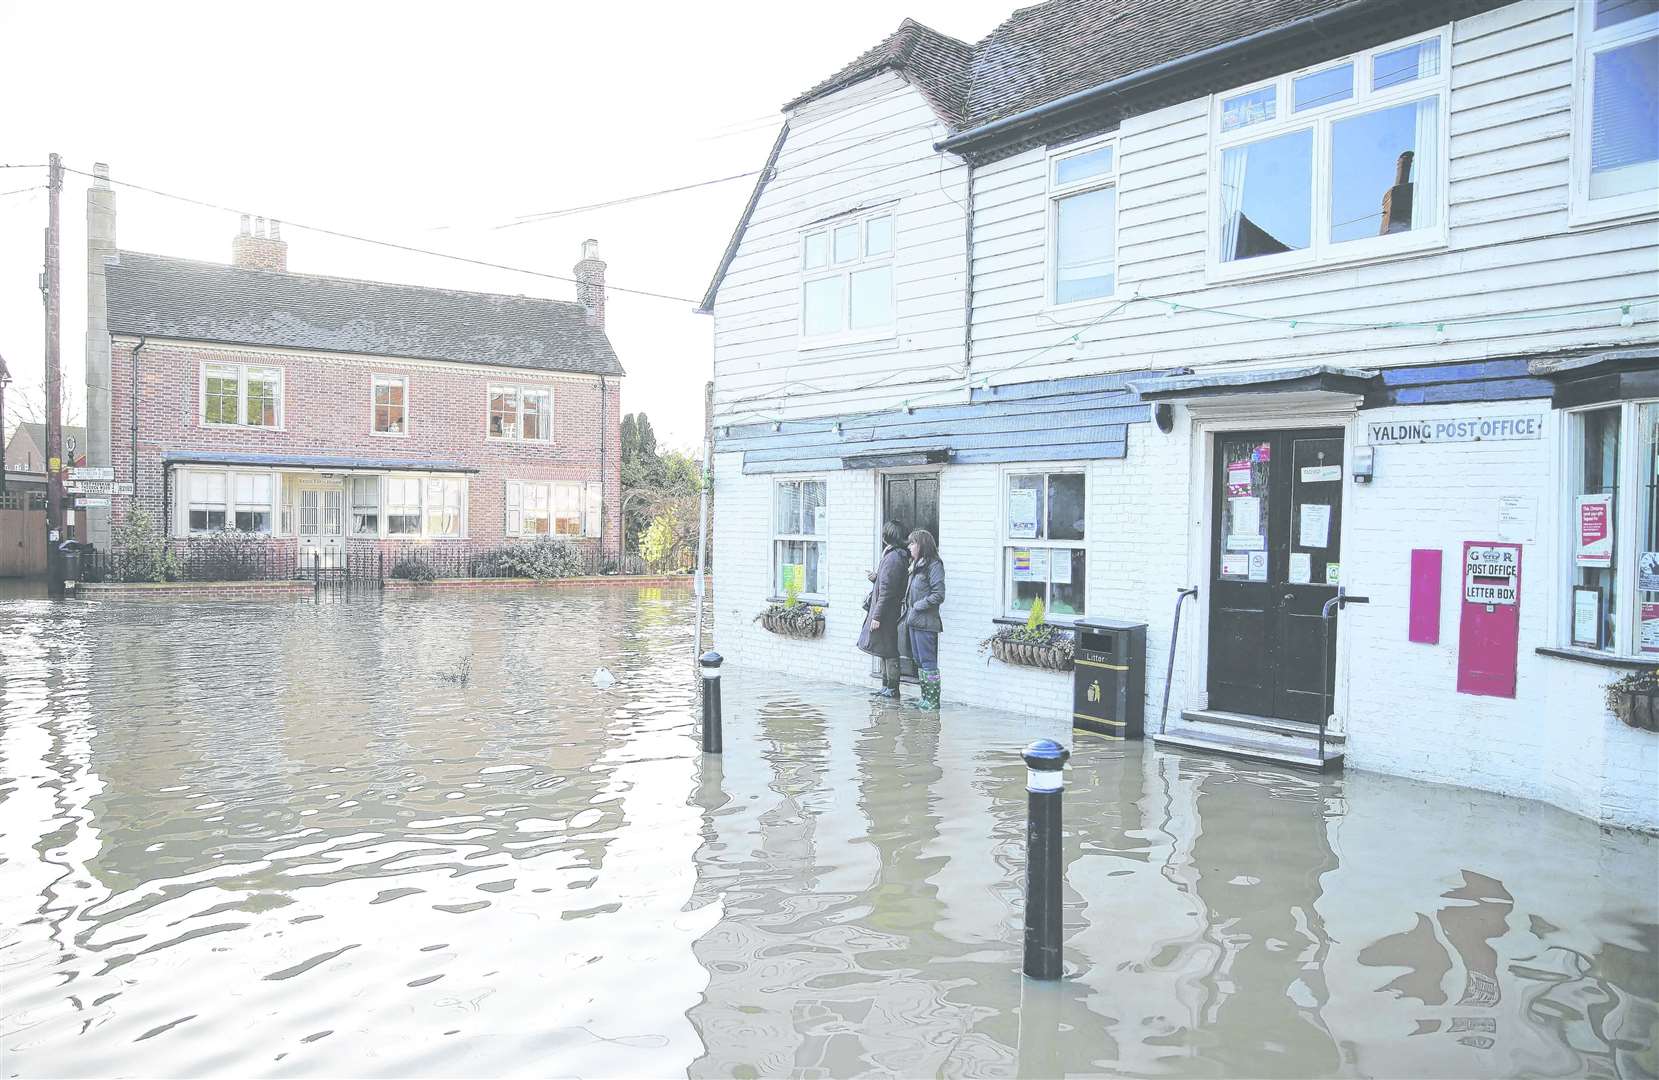 Homes had to be evacuated when Yalding flooded on Christmas Day in 2013. Picture: Richard Wingett